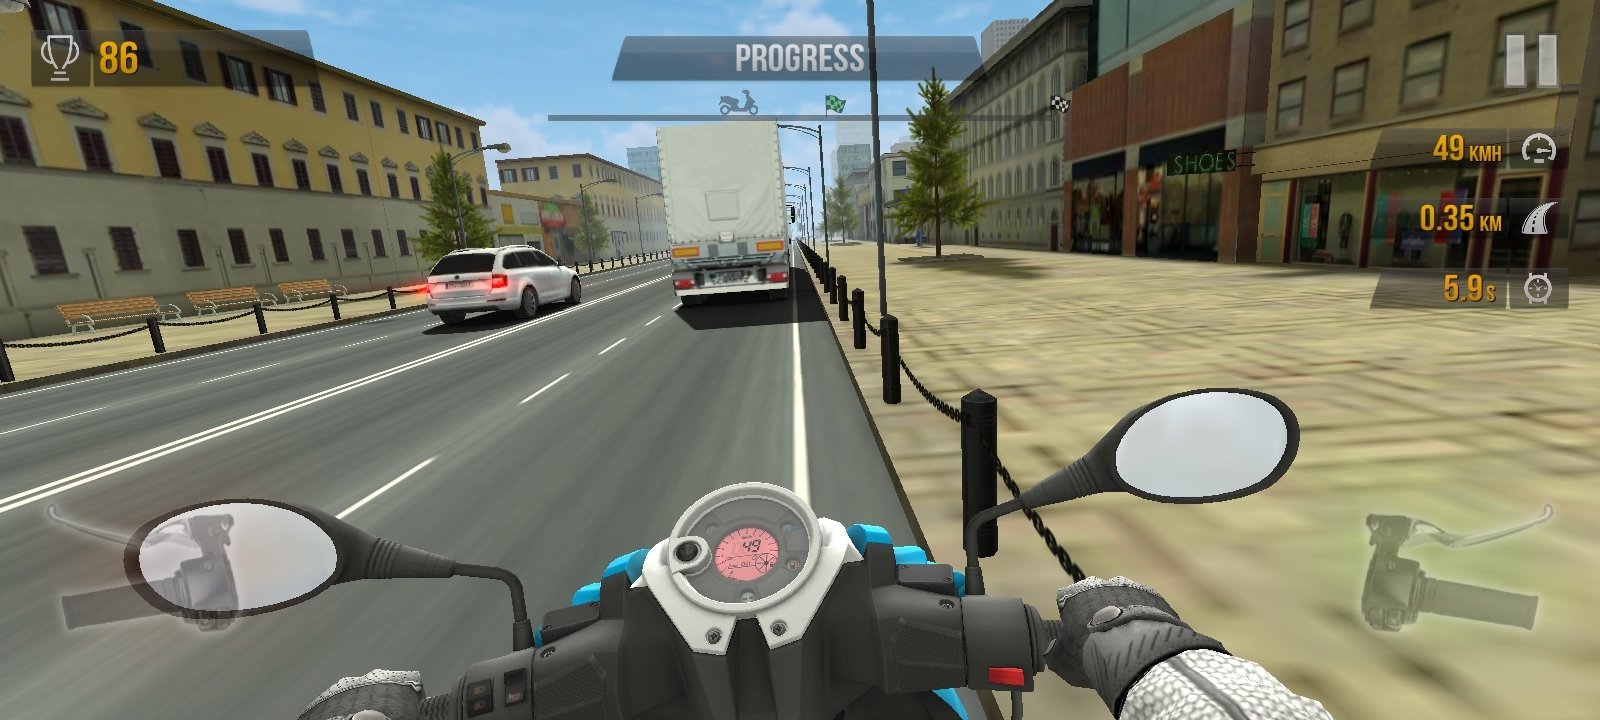 crack traffic rider android game